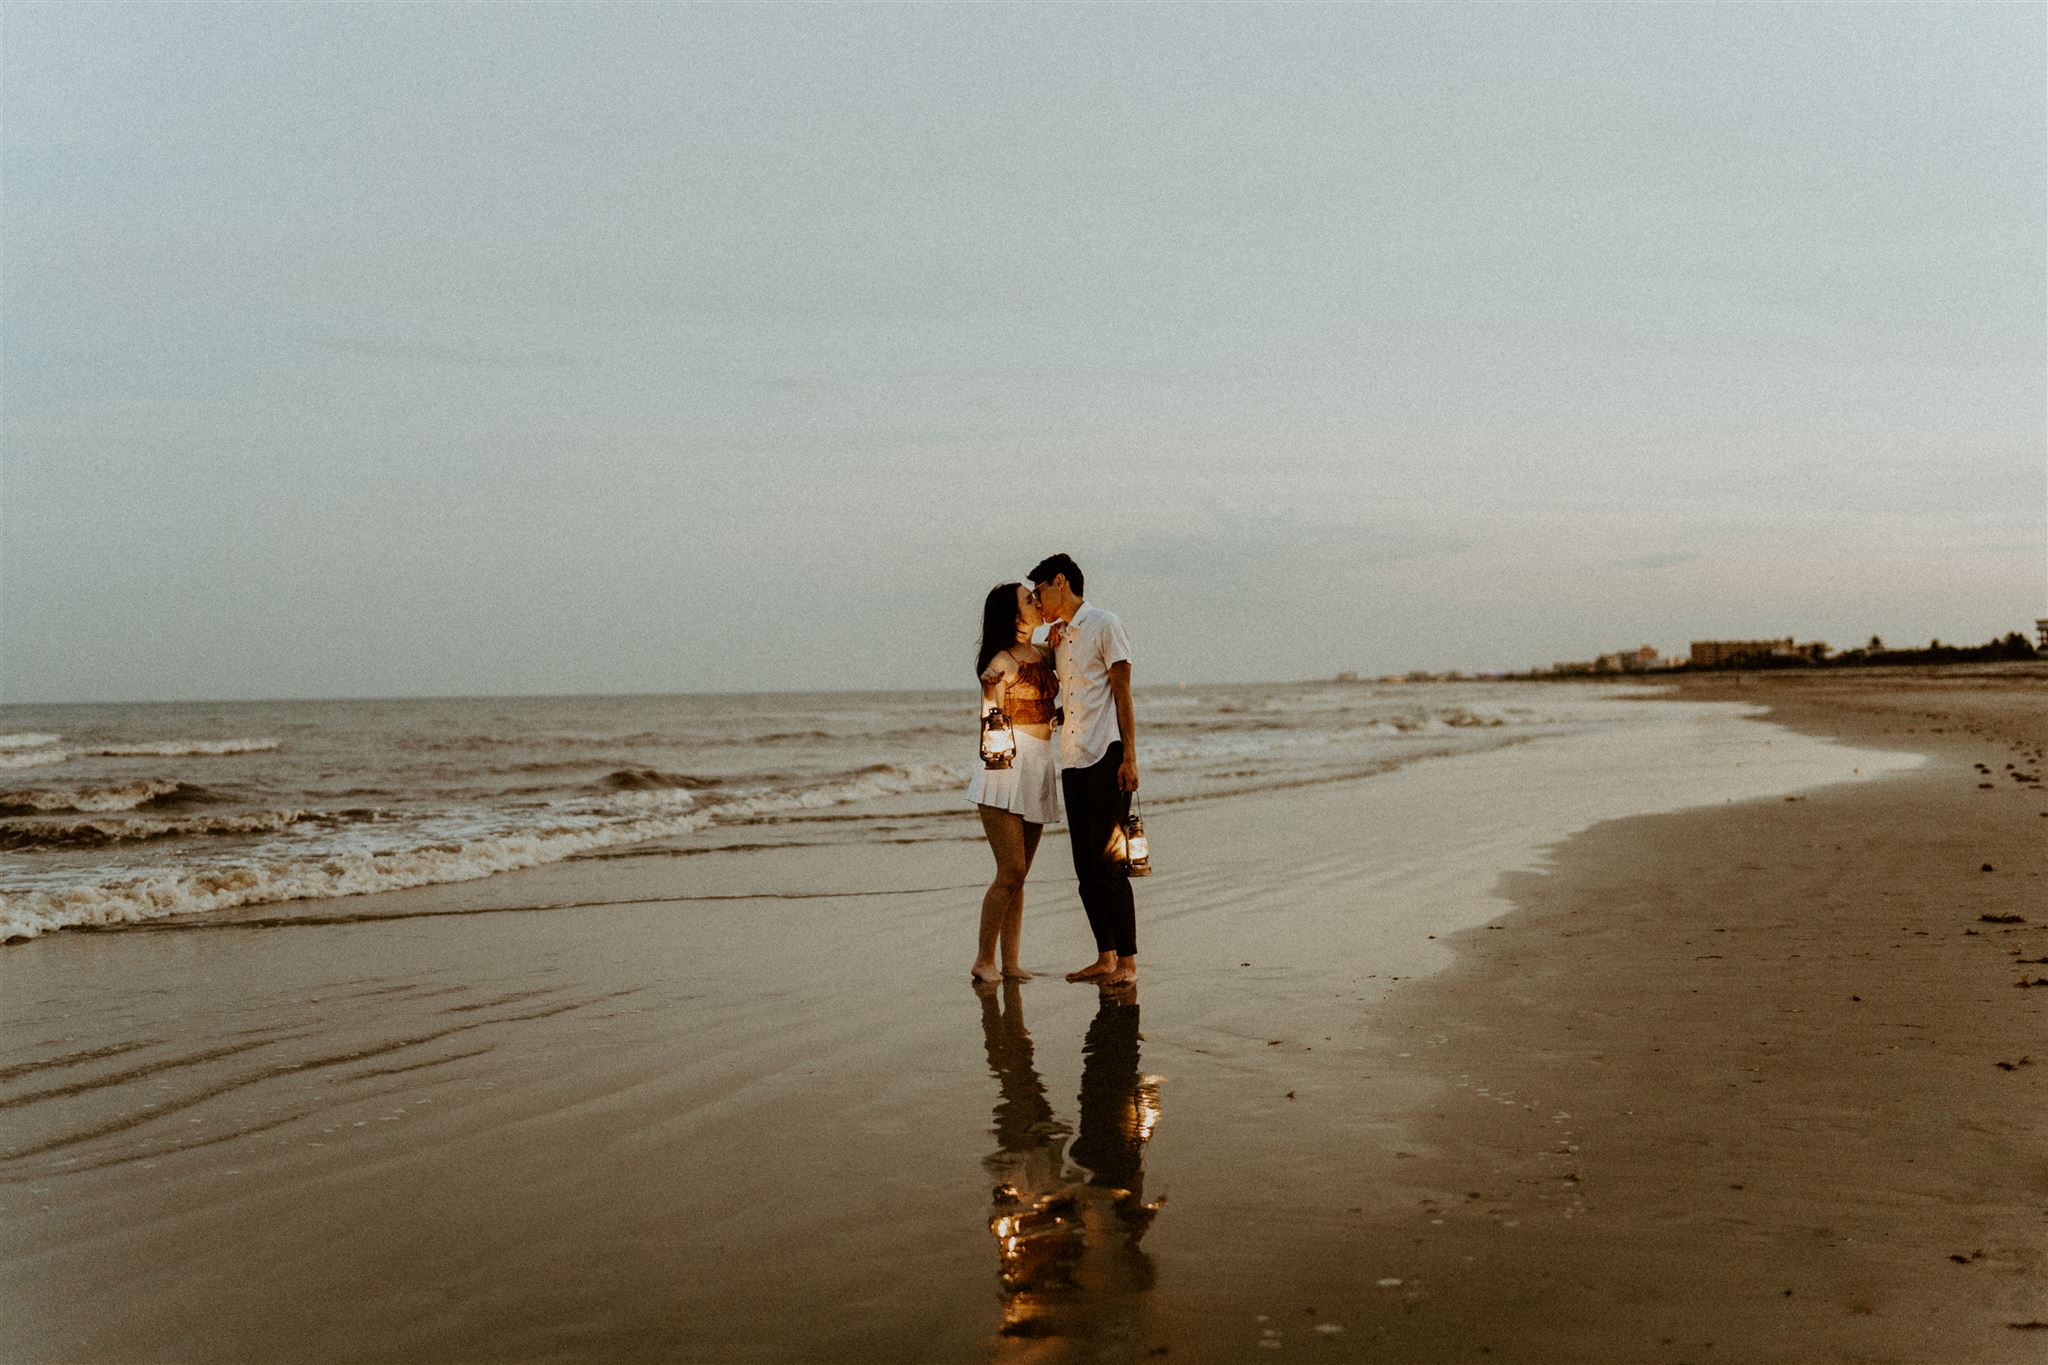 Surprise beach proposal during twilight hour with lanterns